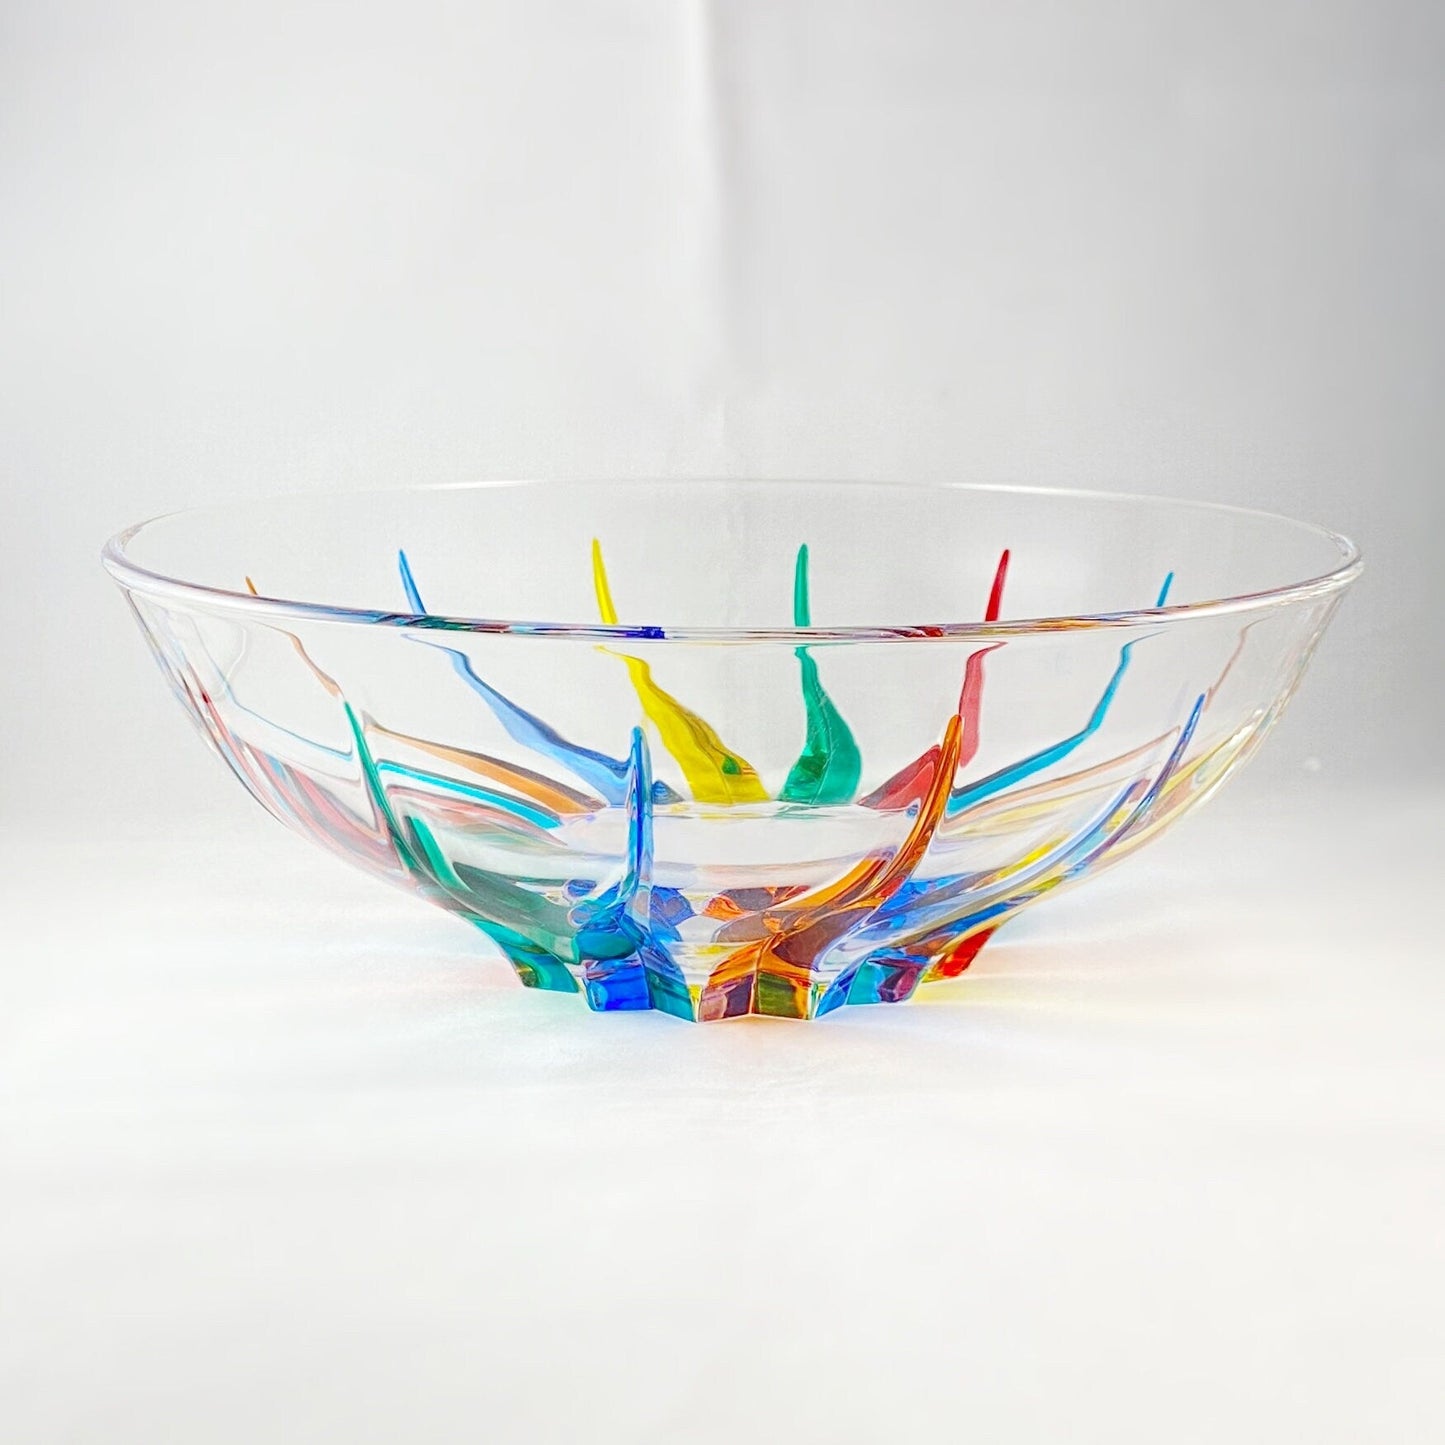 Large Venetian Glass Trix Bowl - Handmade in Italy, Colorful Murano Glass Statement Bowl